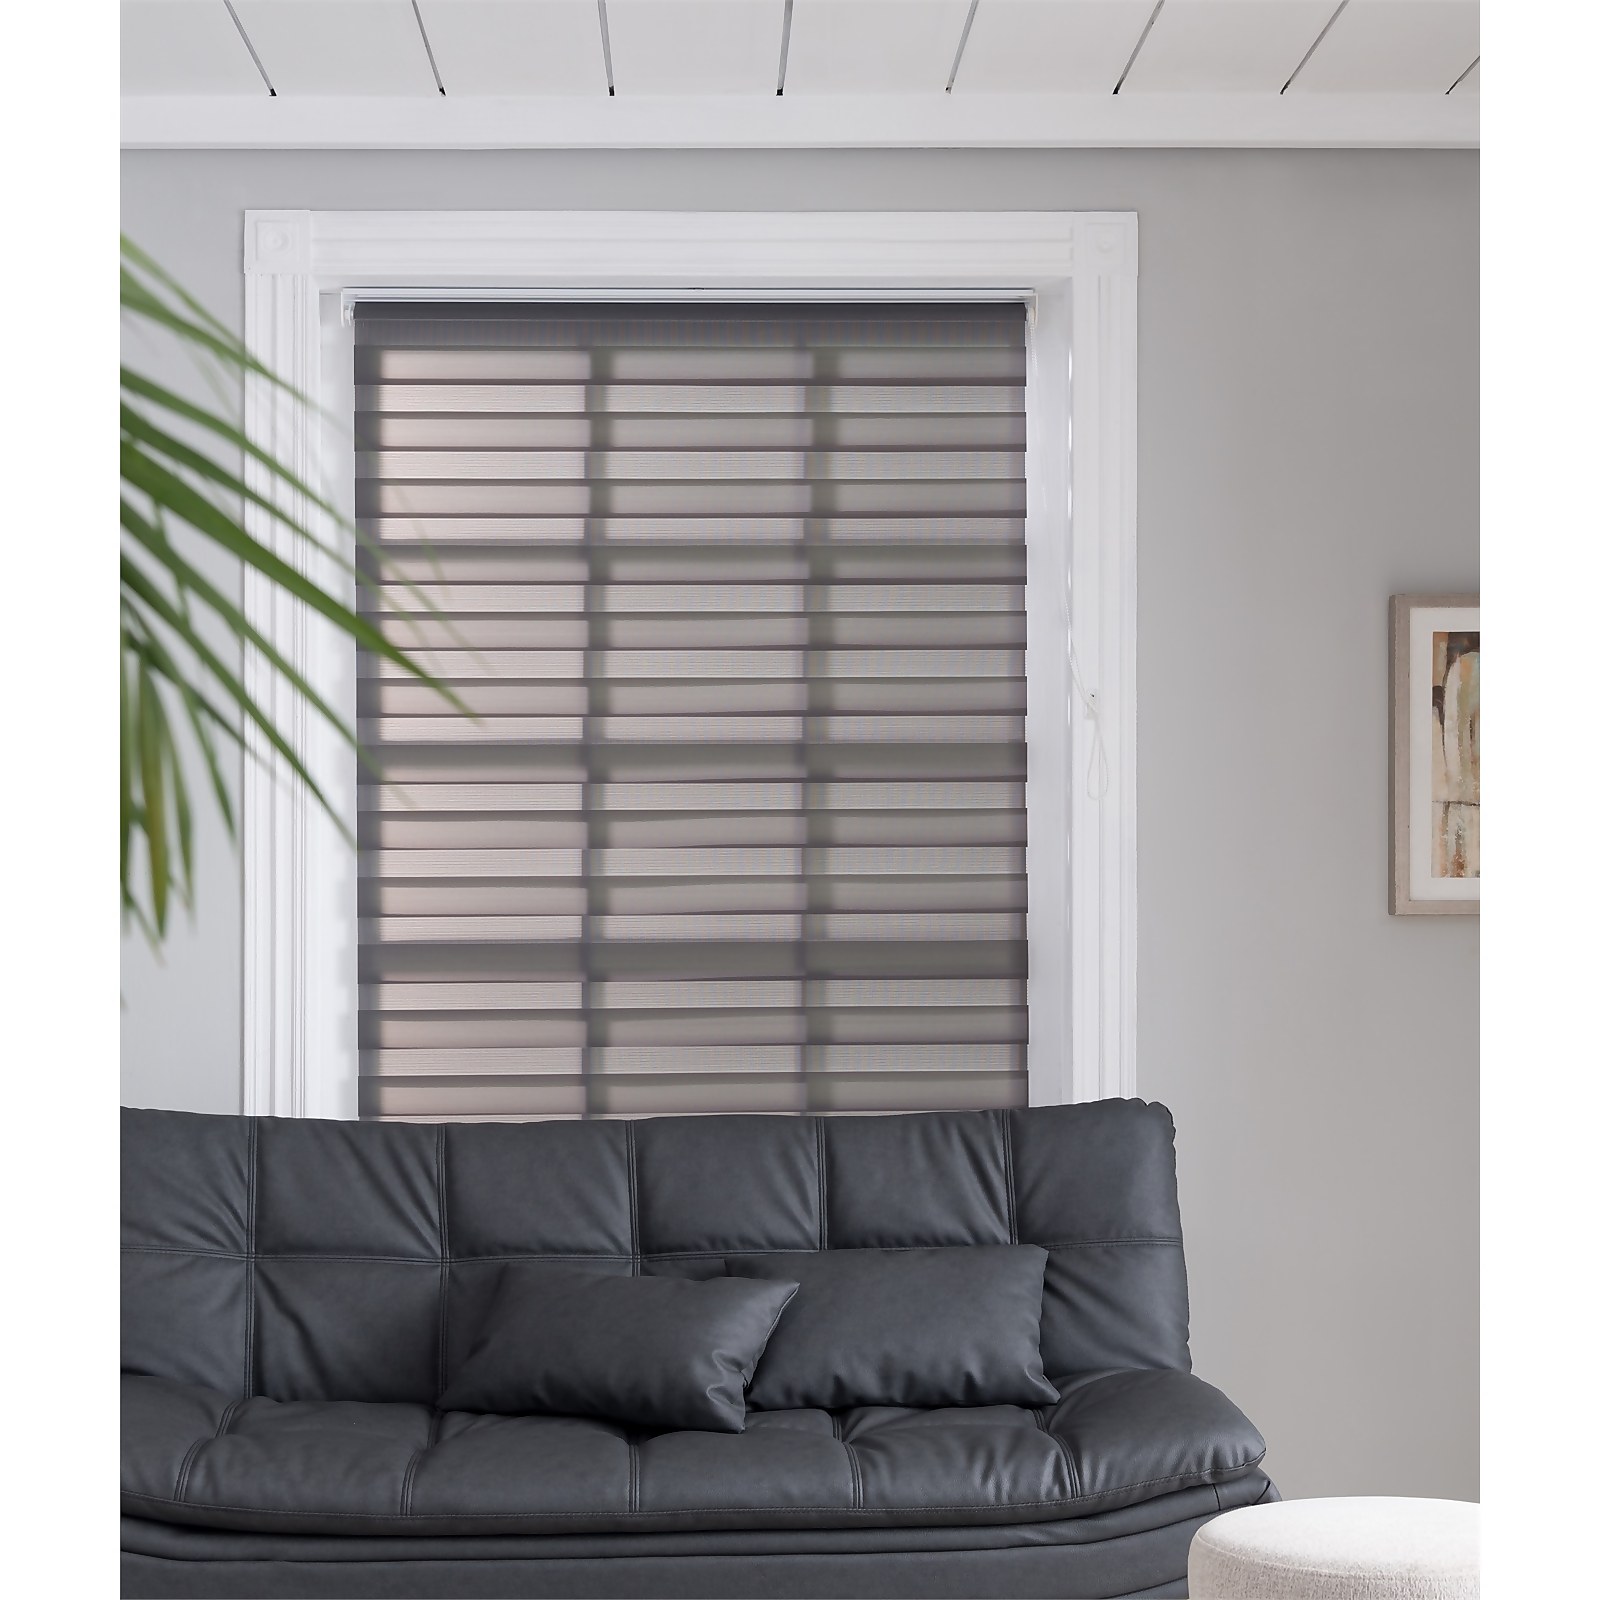 Photo of Night & Day Roller Blind - Dove Grey - 60x160cm